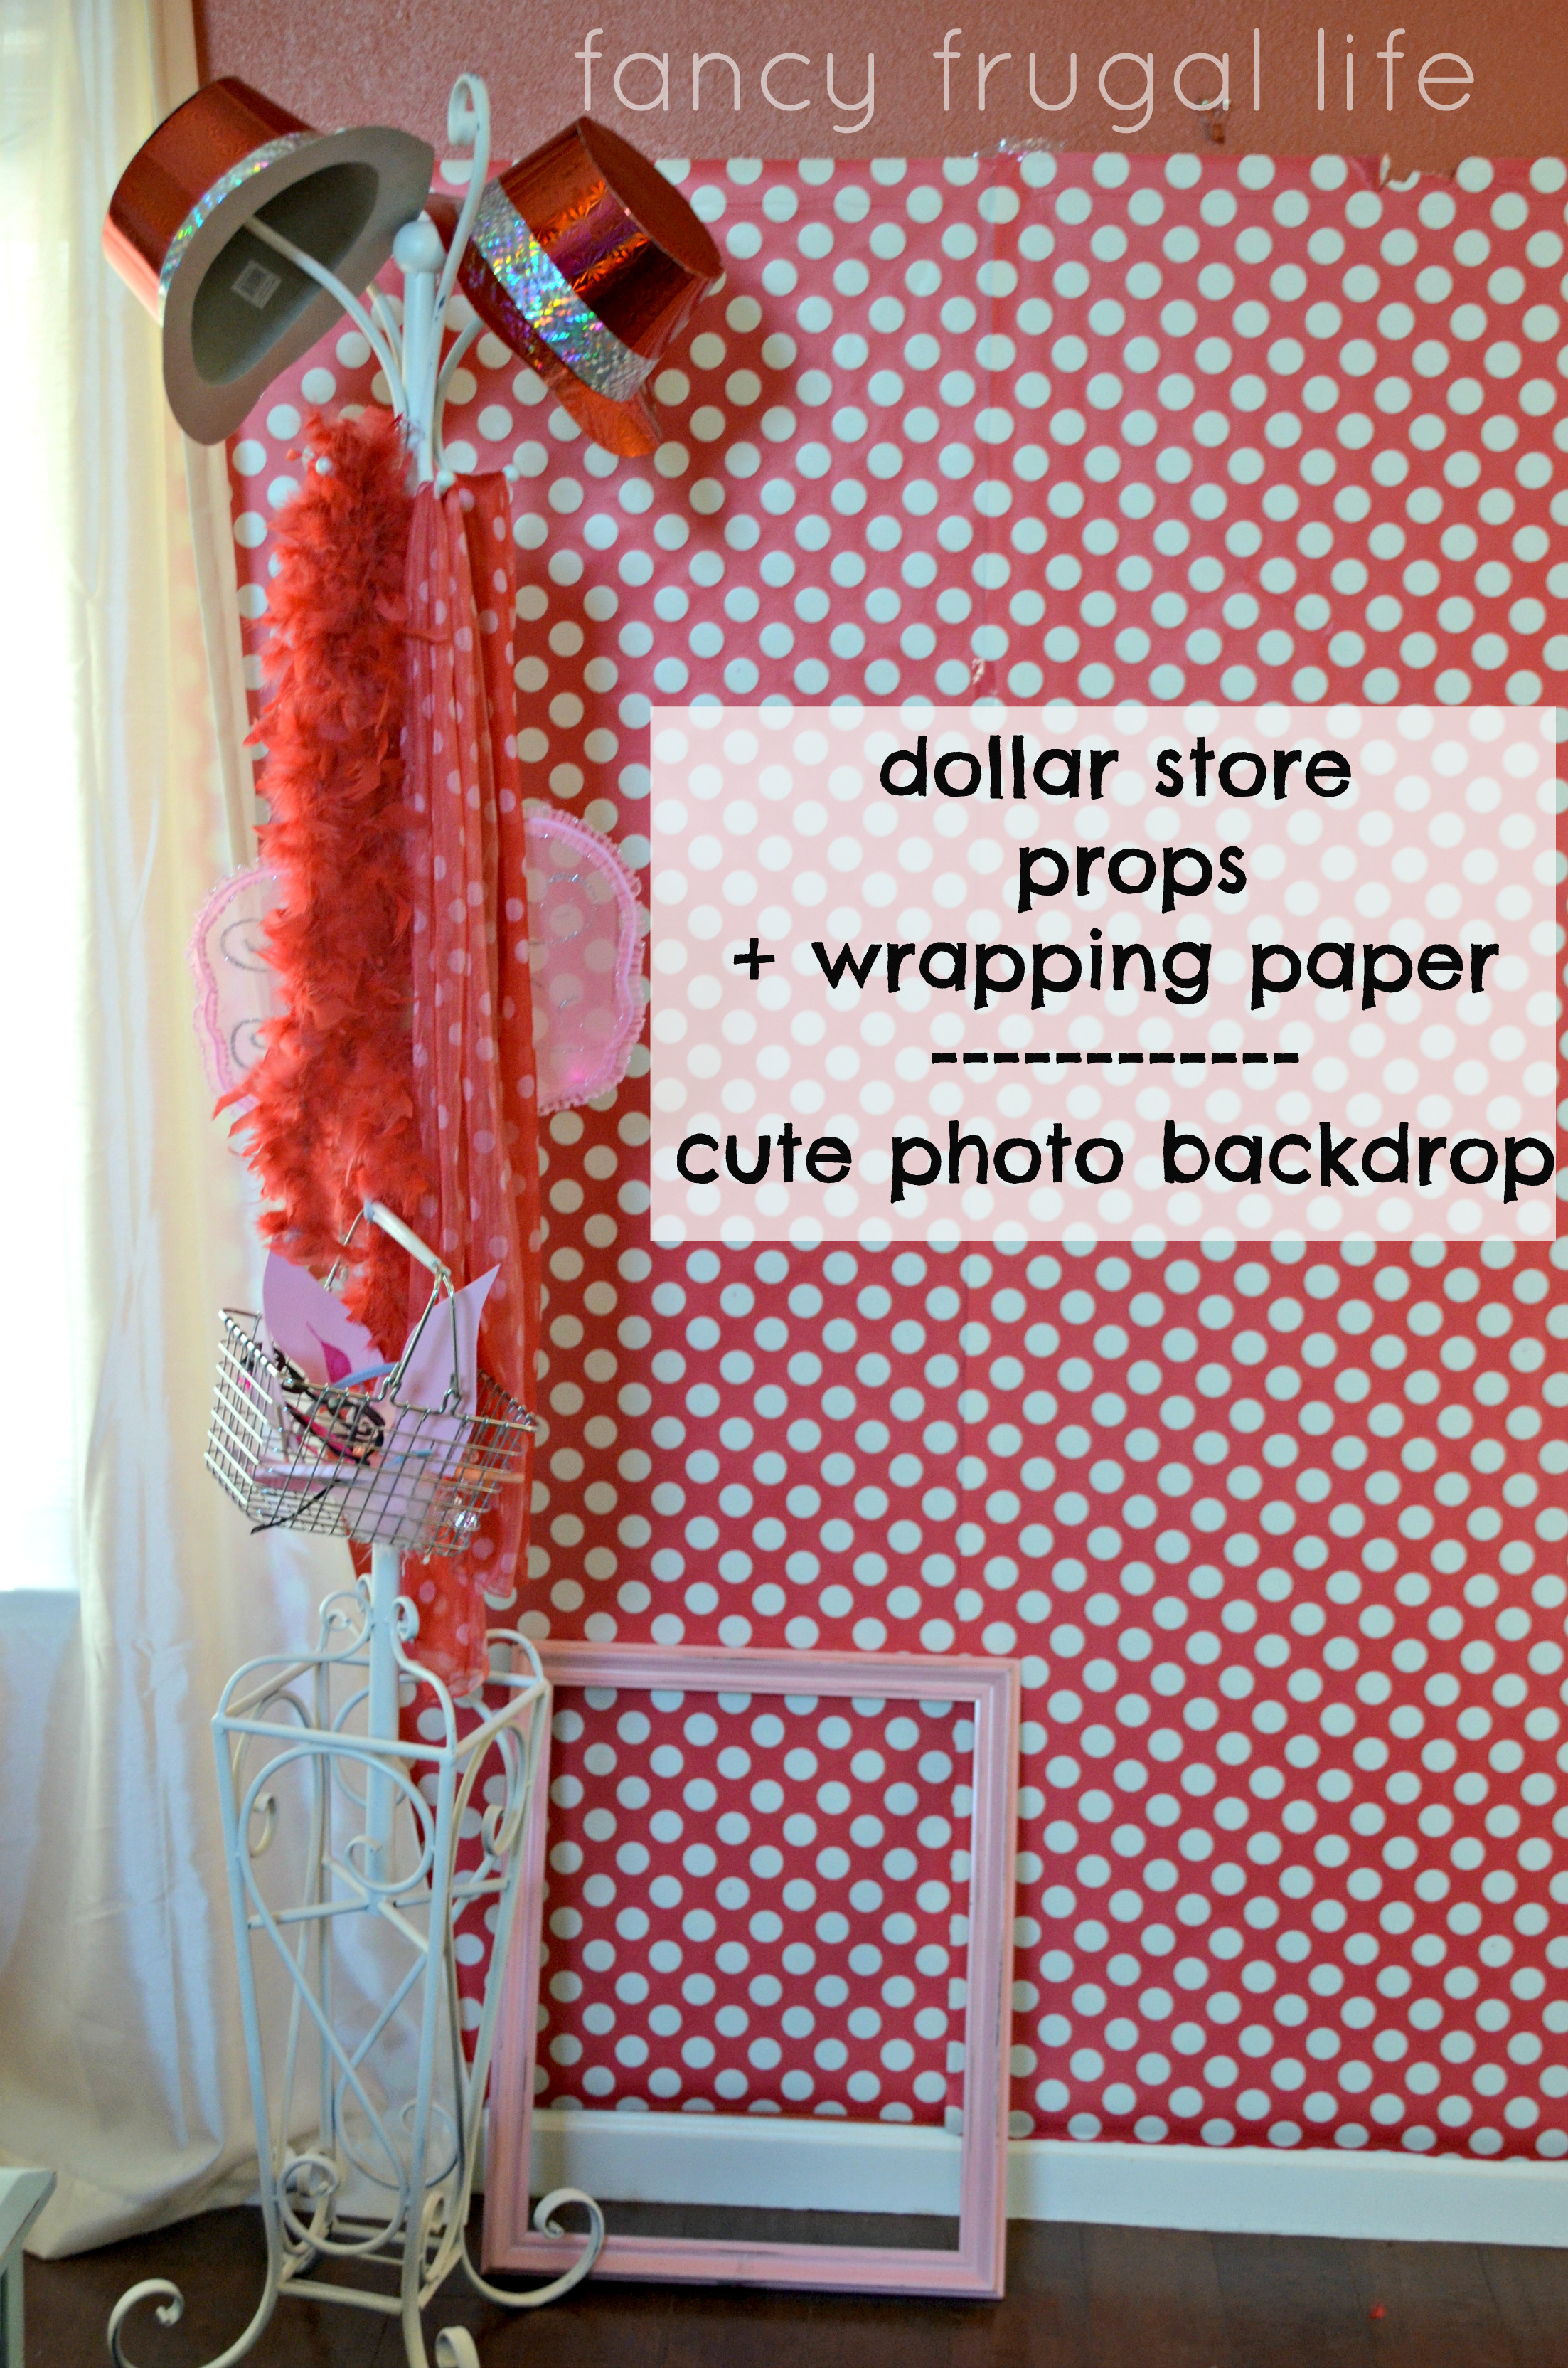 DIY Christmas Photo Backdrop
 6 Fancy Frugal Party Planning Tips & the Olivia the Pig